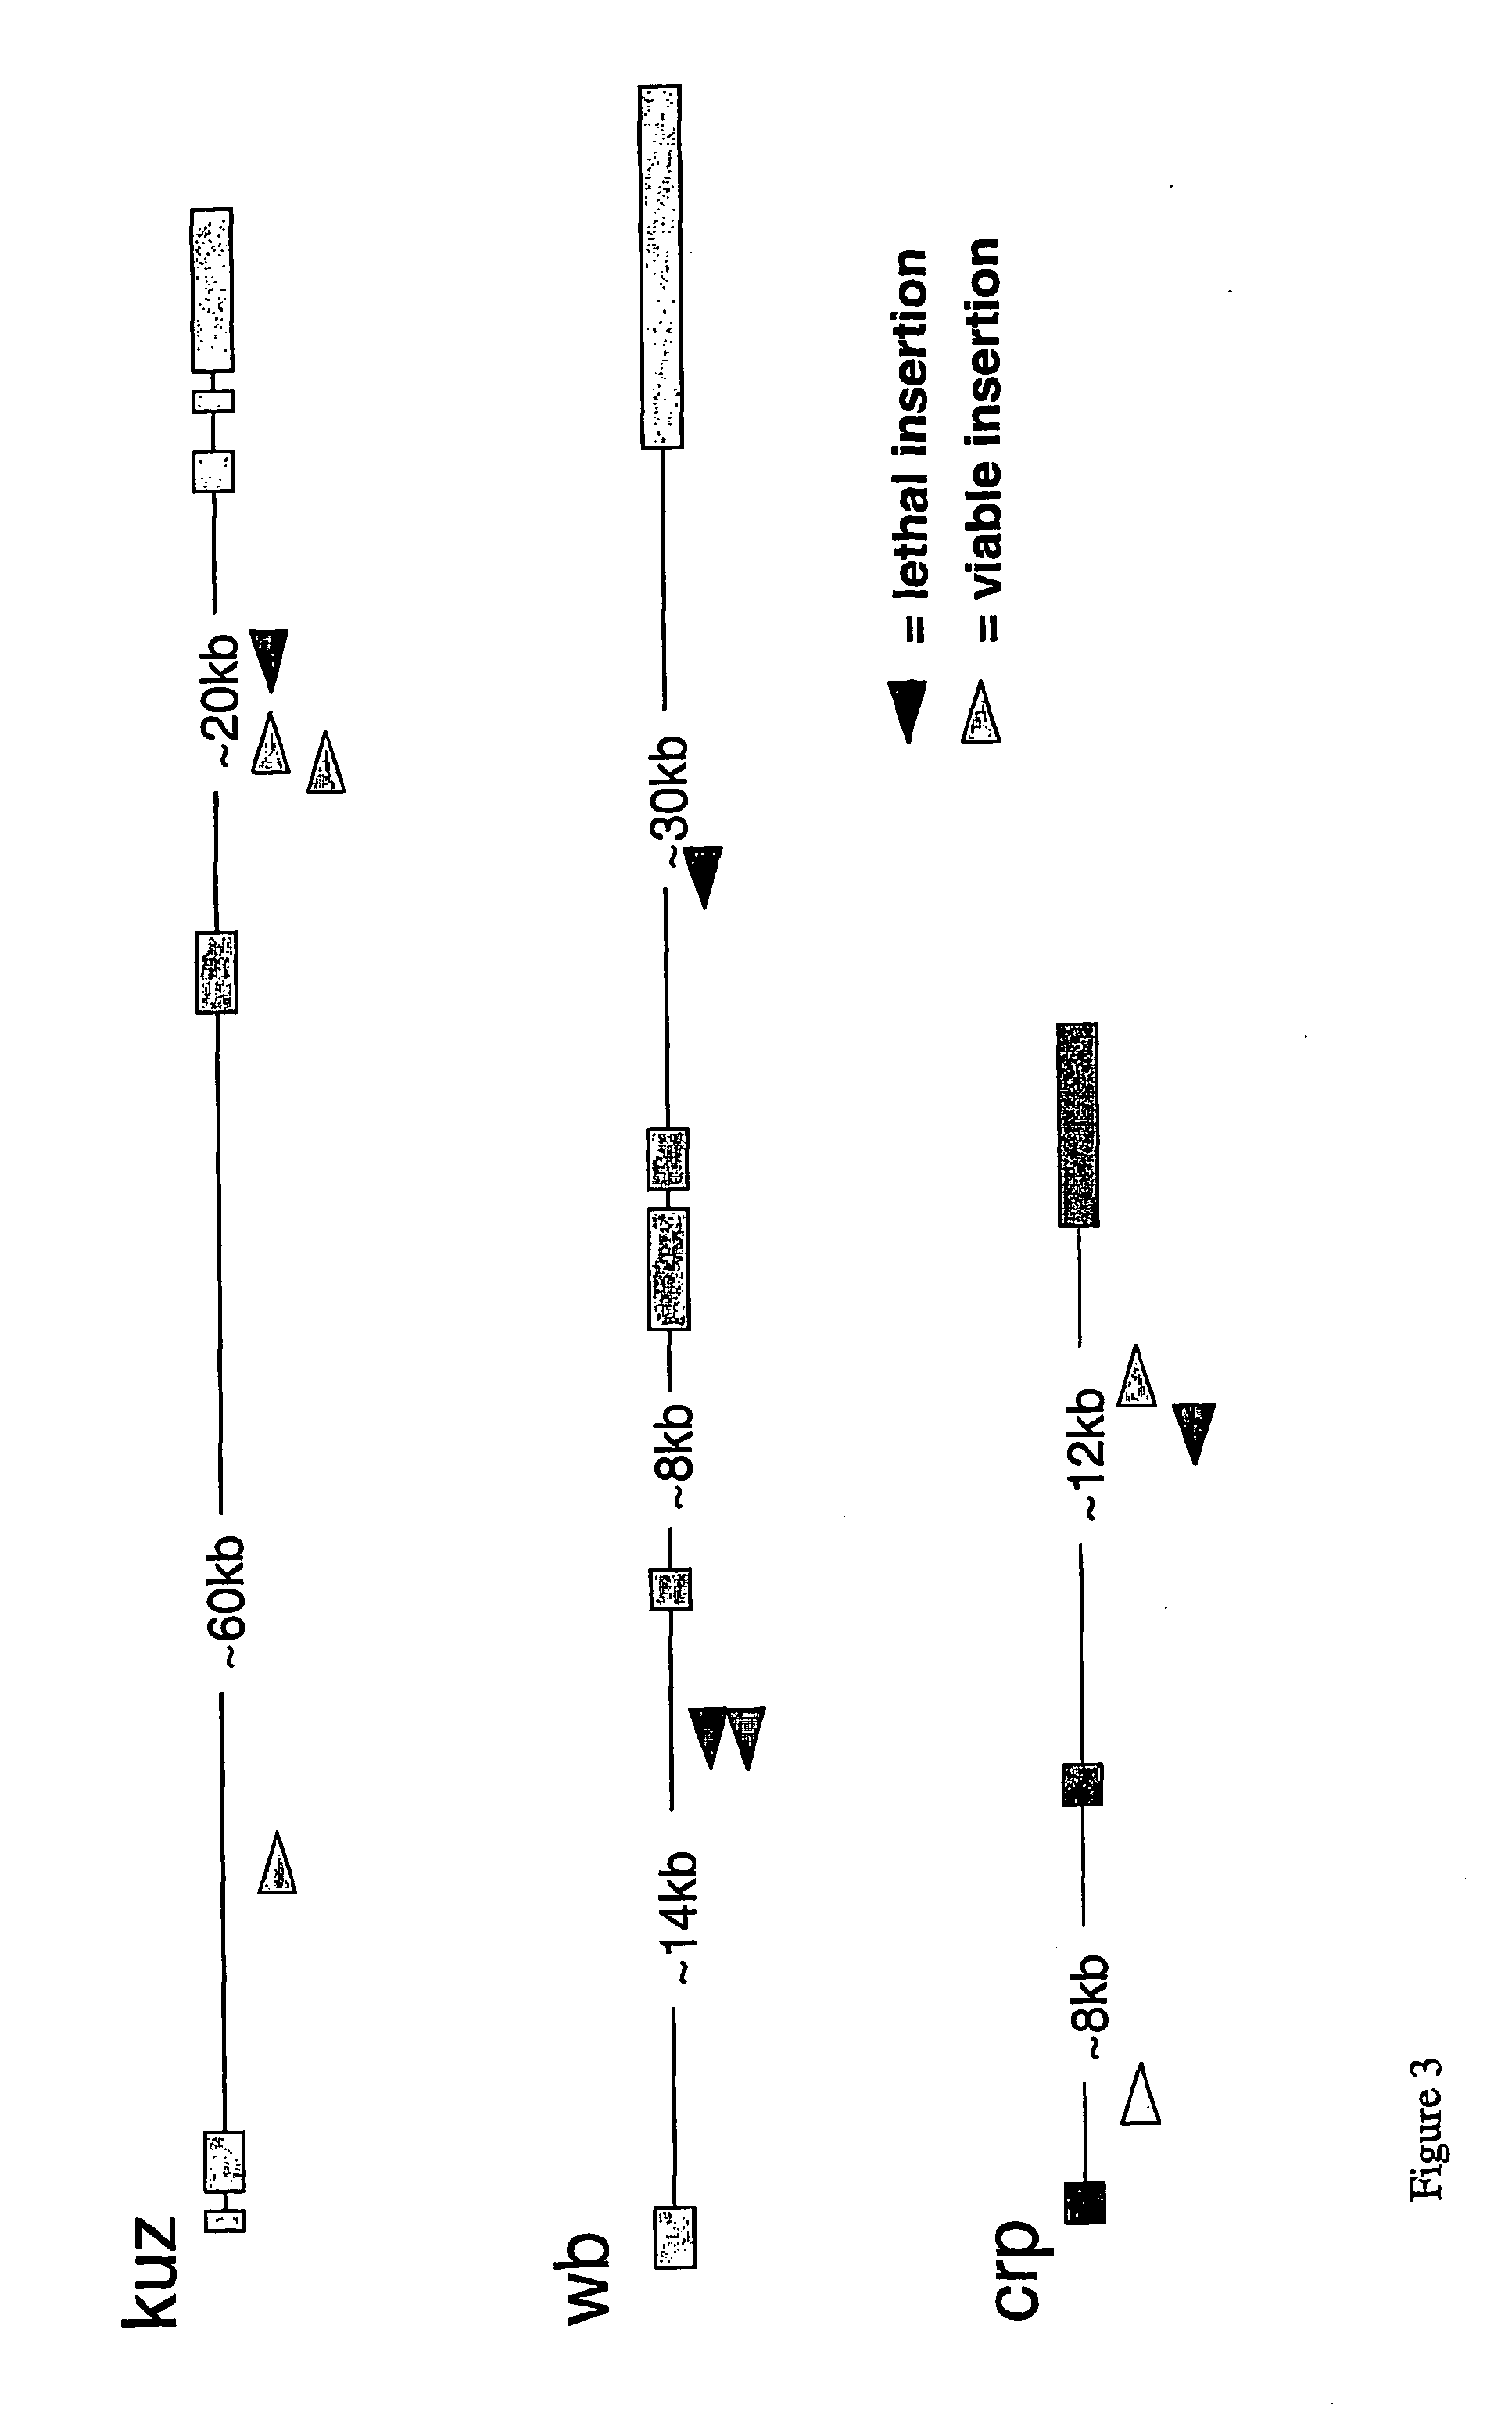 Insect ammunition vectors and methods of use to identify pesticide targets